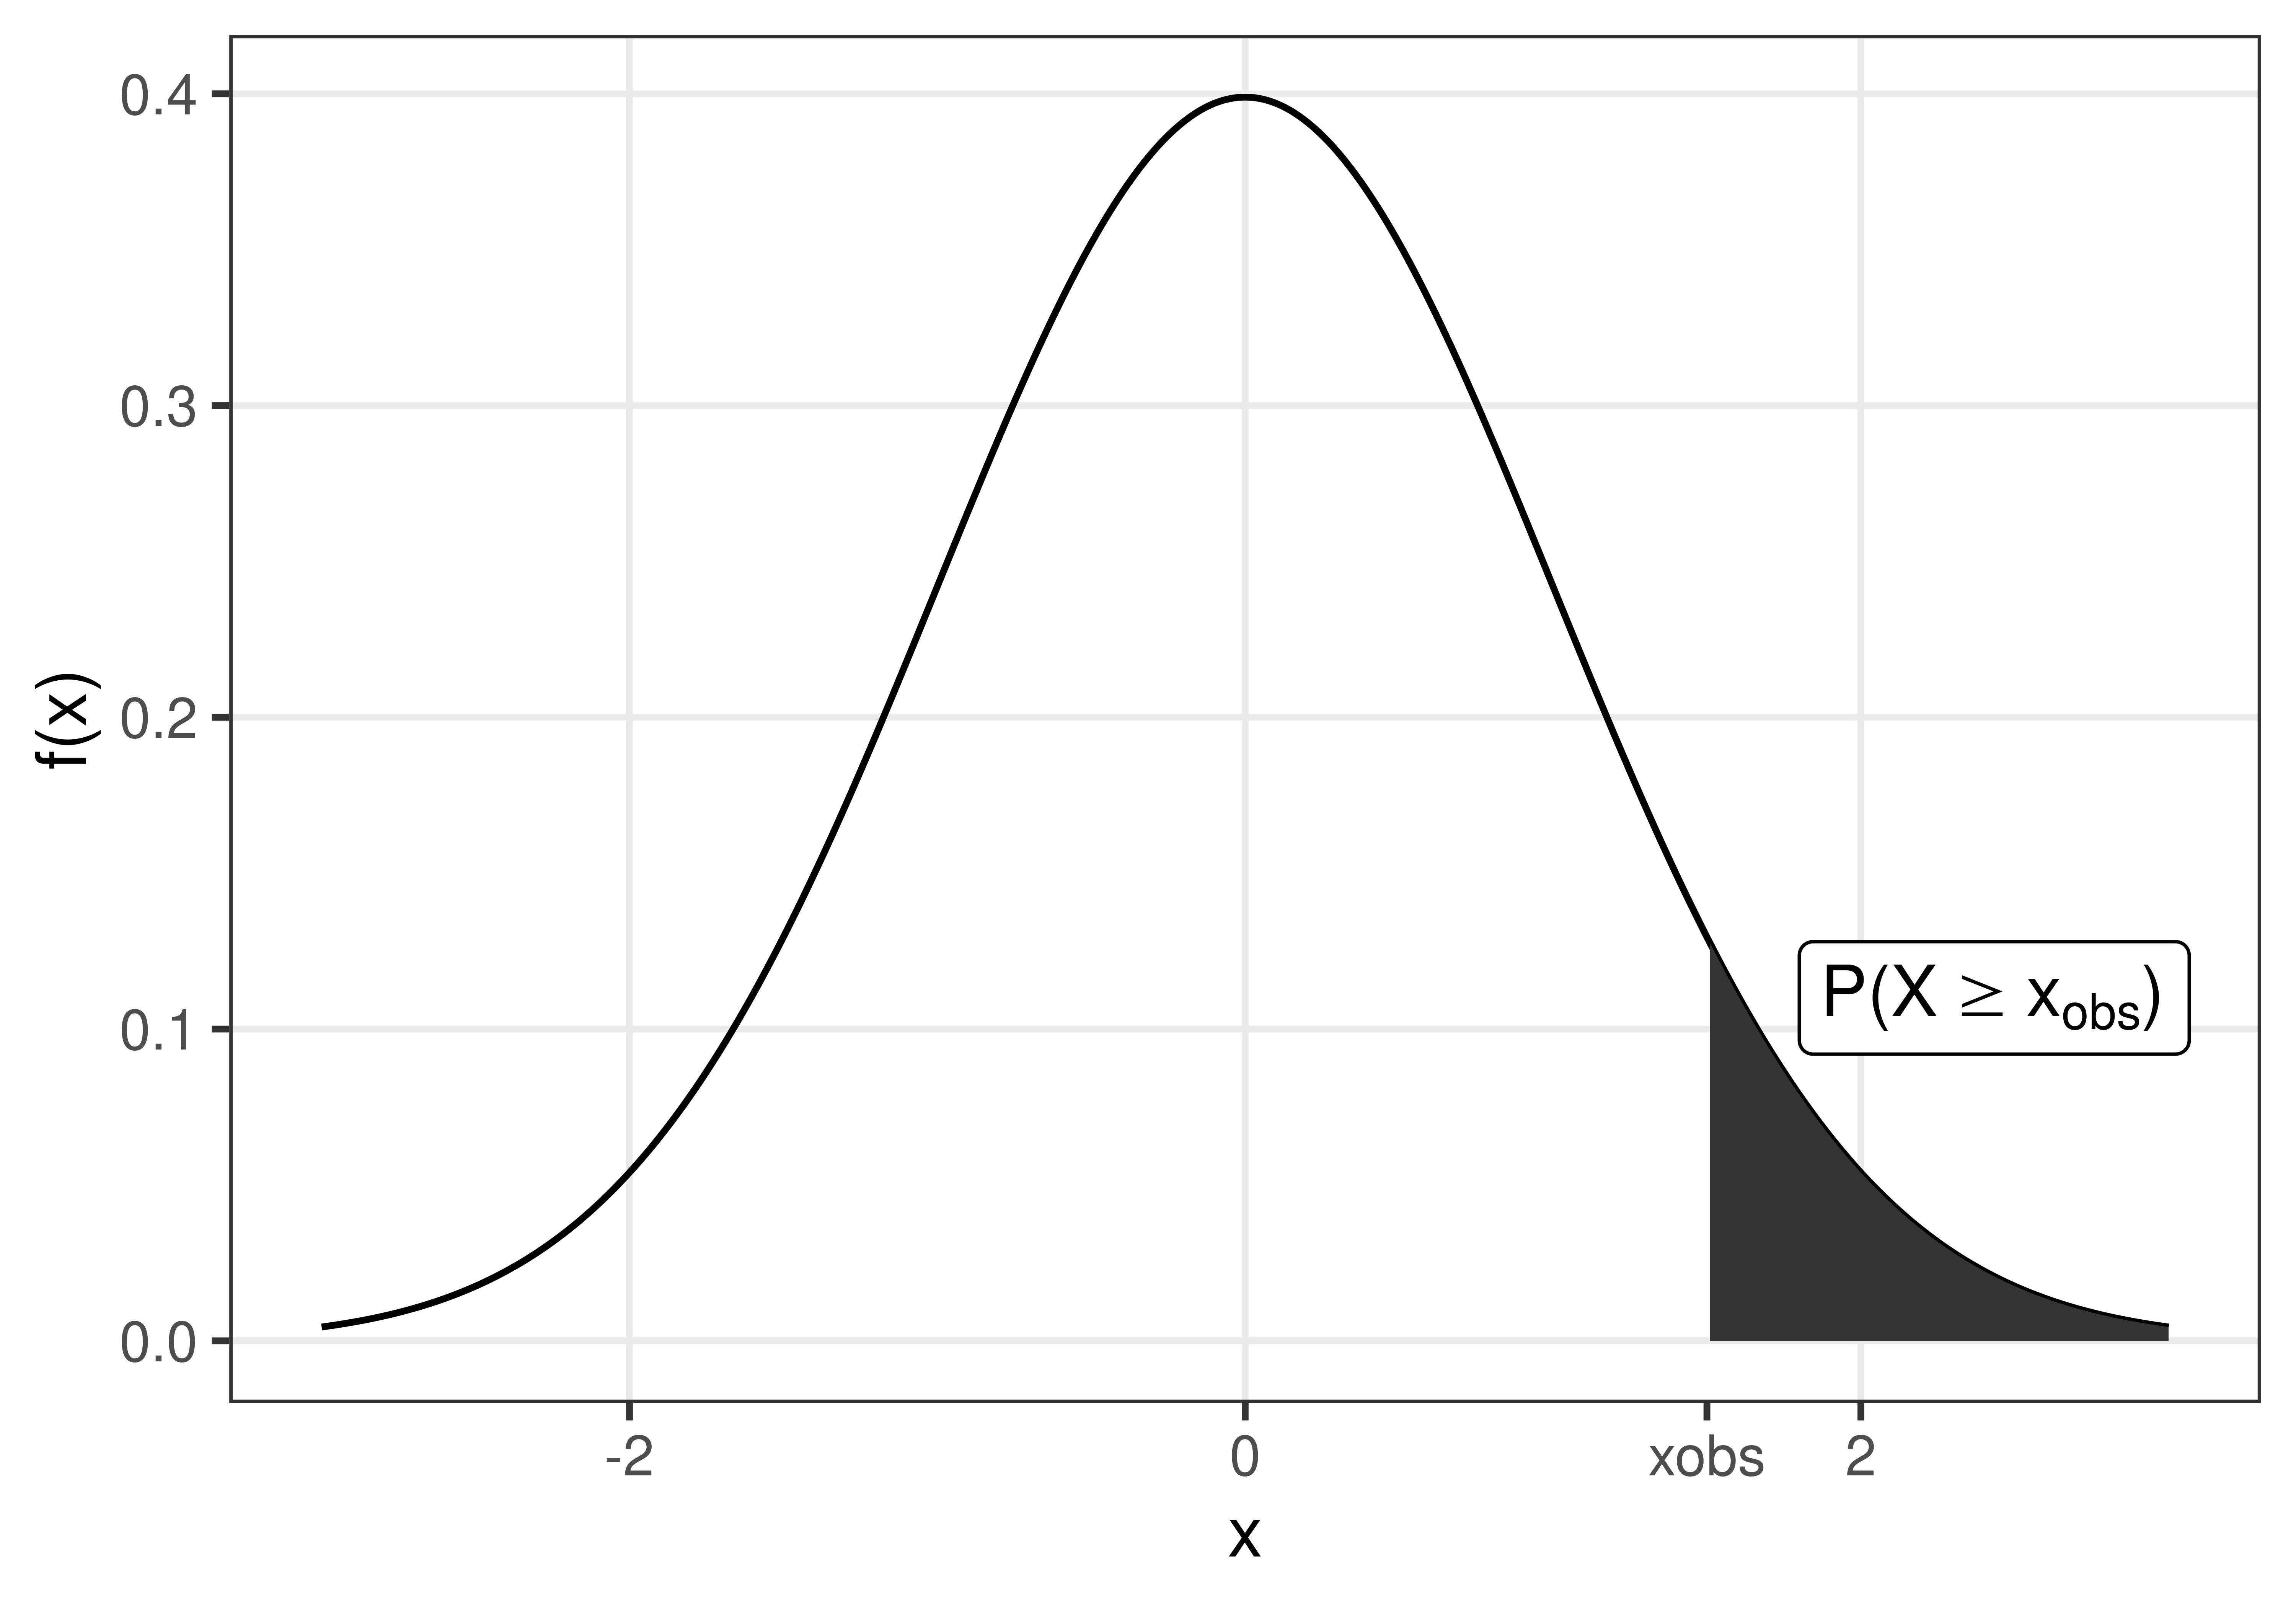 The p-value is the probability to observe $x_{obs}$ or something more extreme, if the null hypothesis is true.